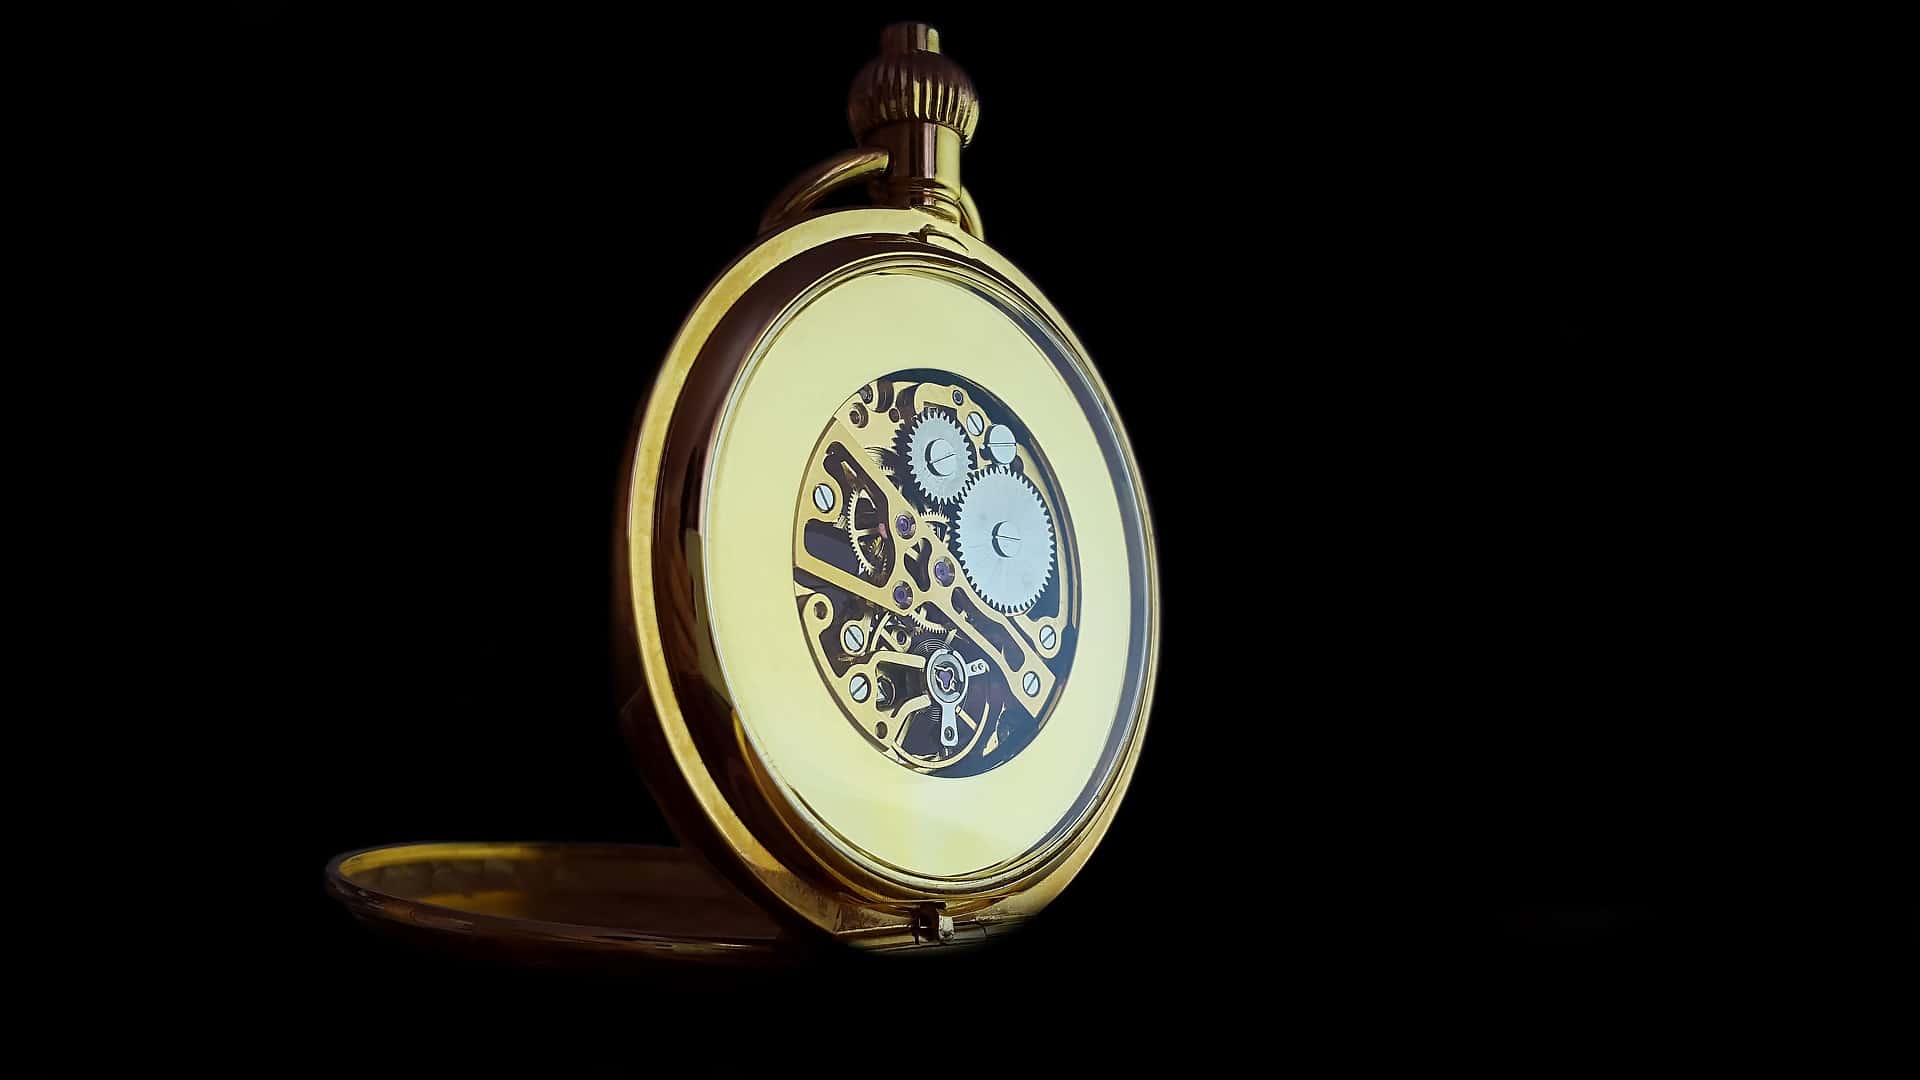 Gold colored classic pocket watch against dark black background. Internal watch components are visible.